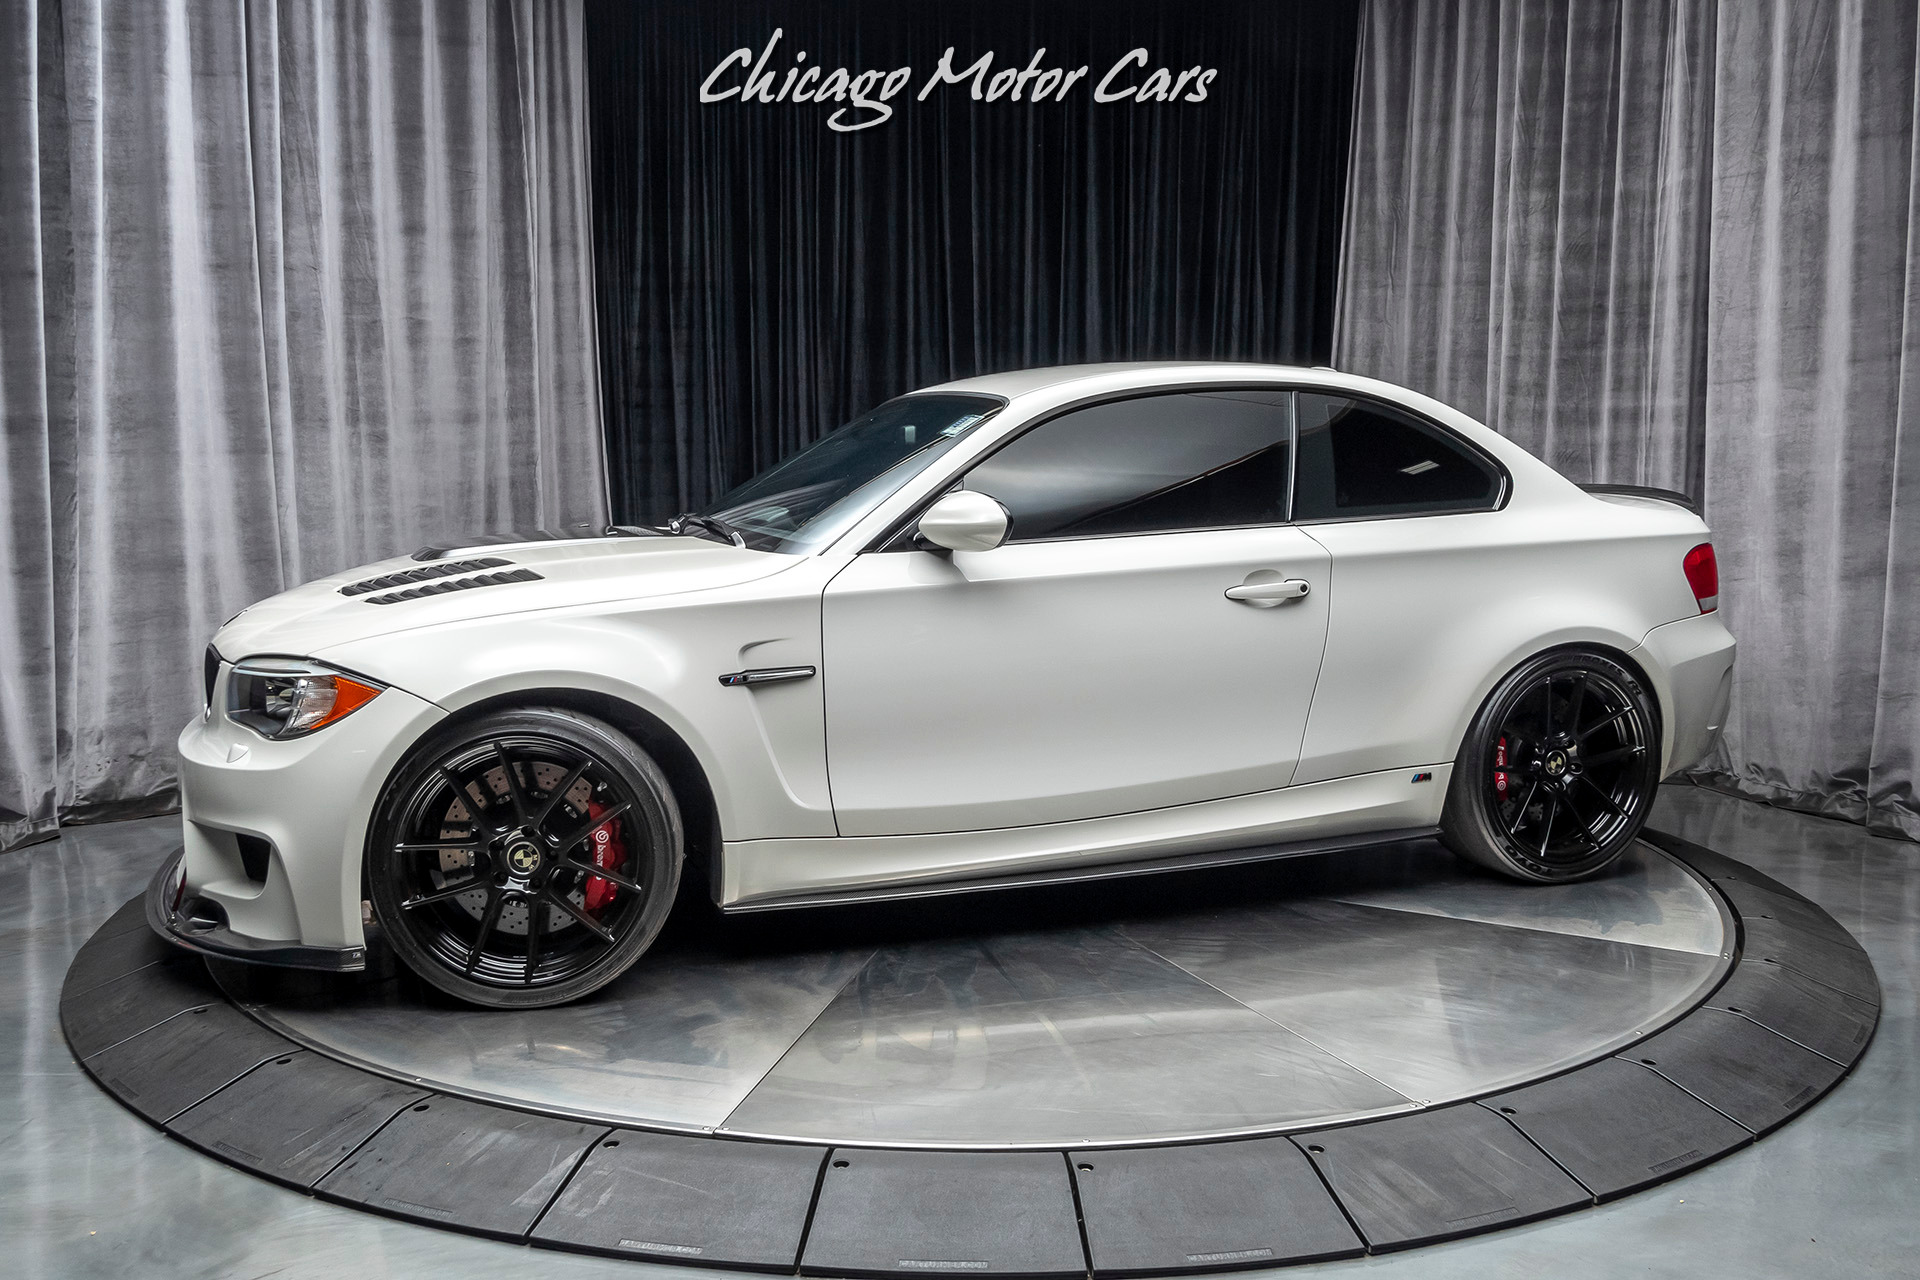 Used-2011-BMW-1M-Coupe-60k-in-UPGRADES-800HP